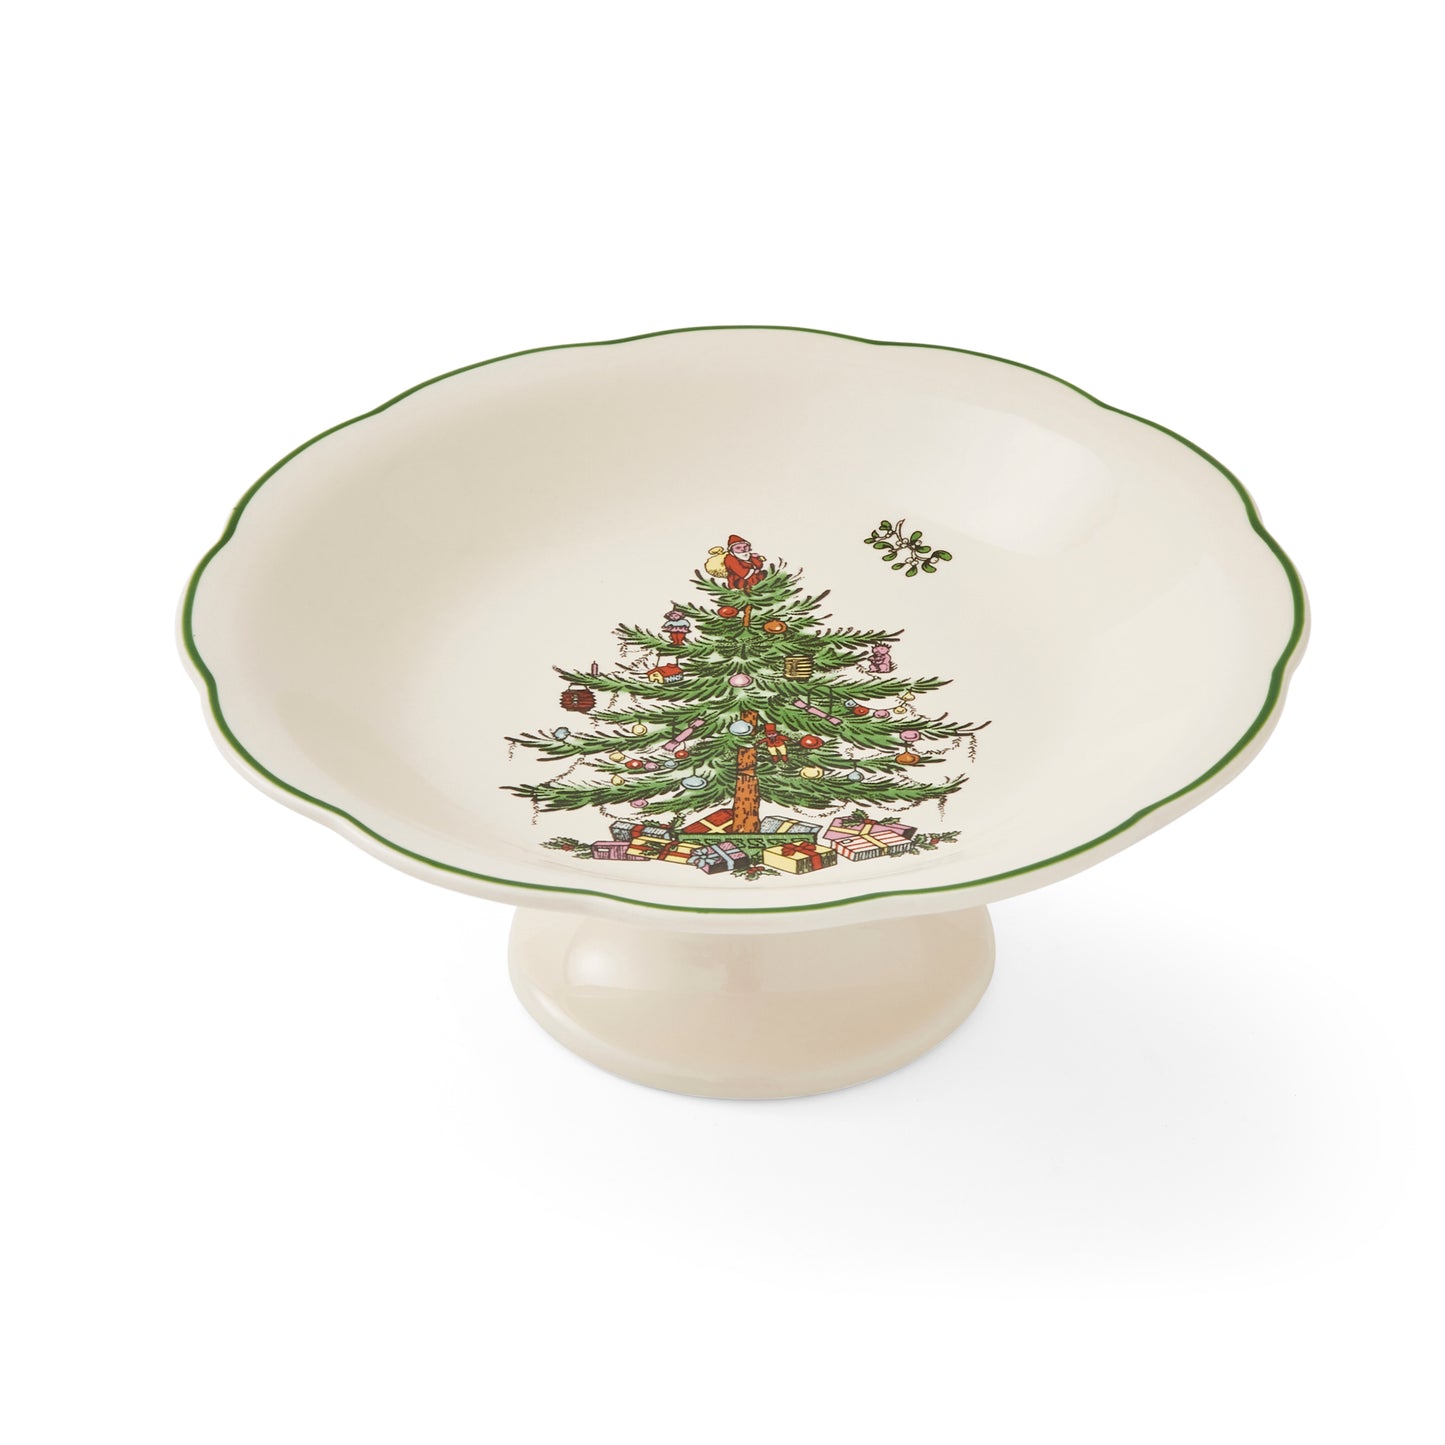 Spode Christmas Tree Sculpted Candy Dish